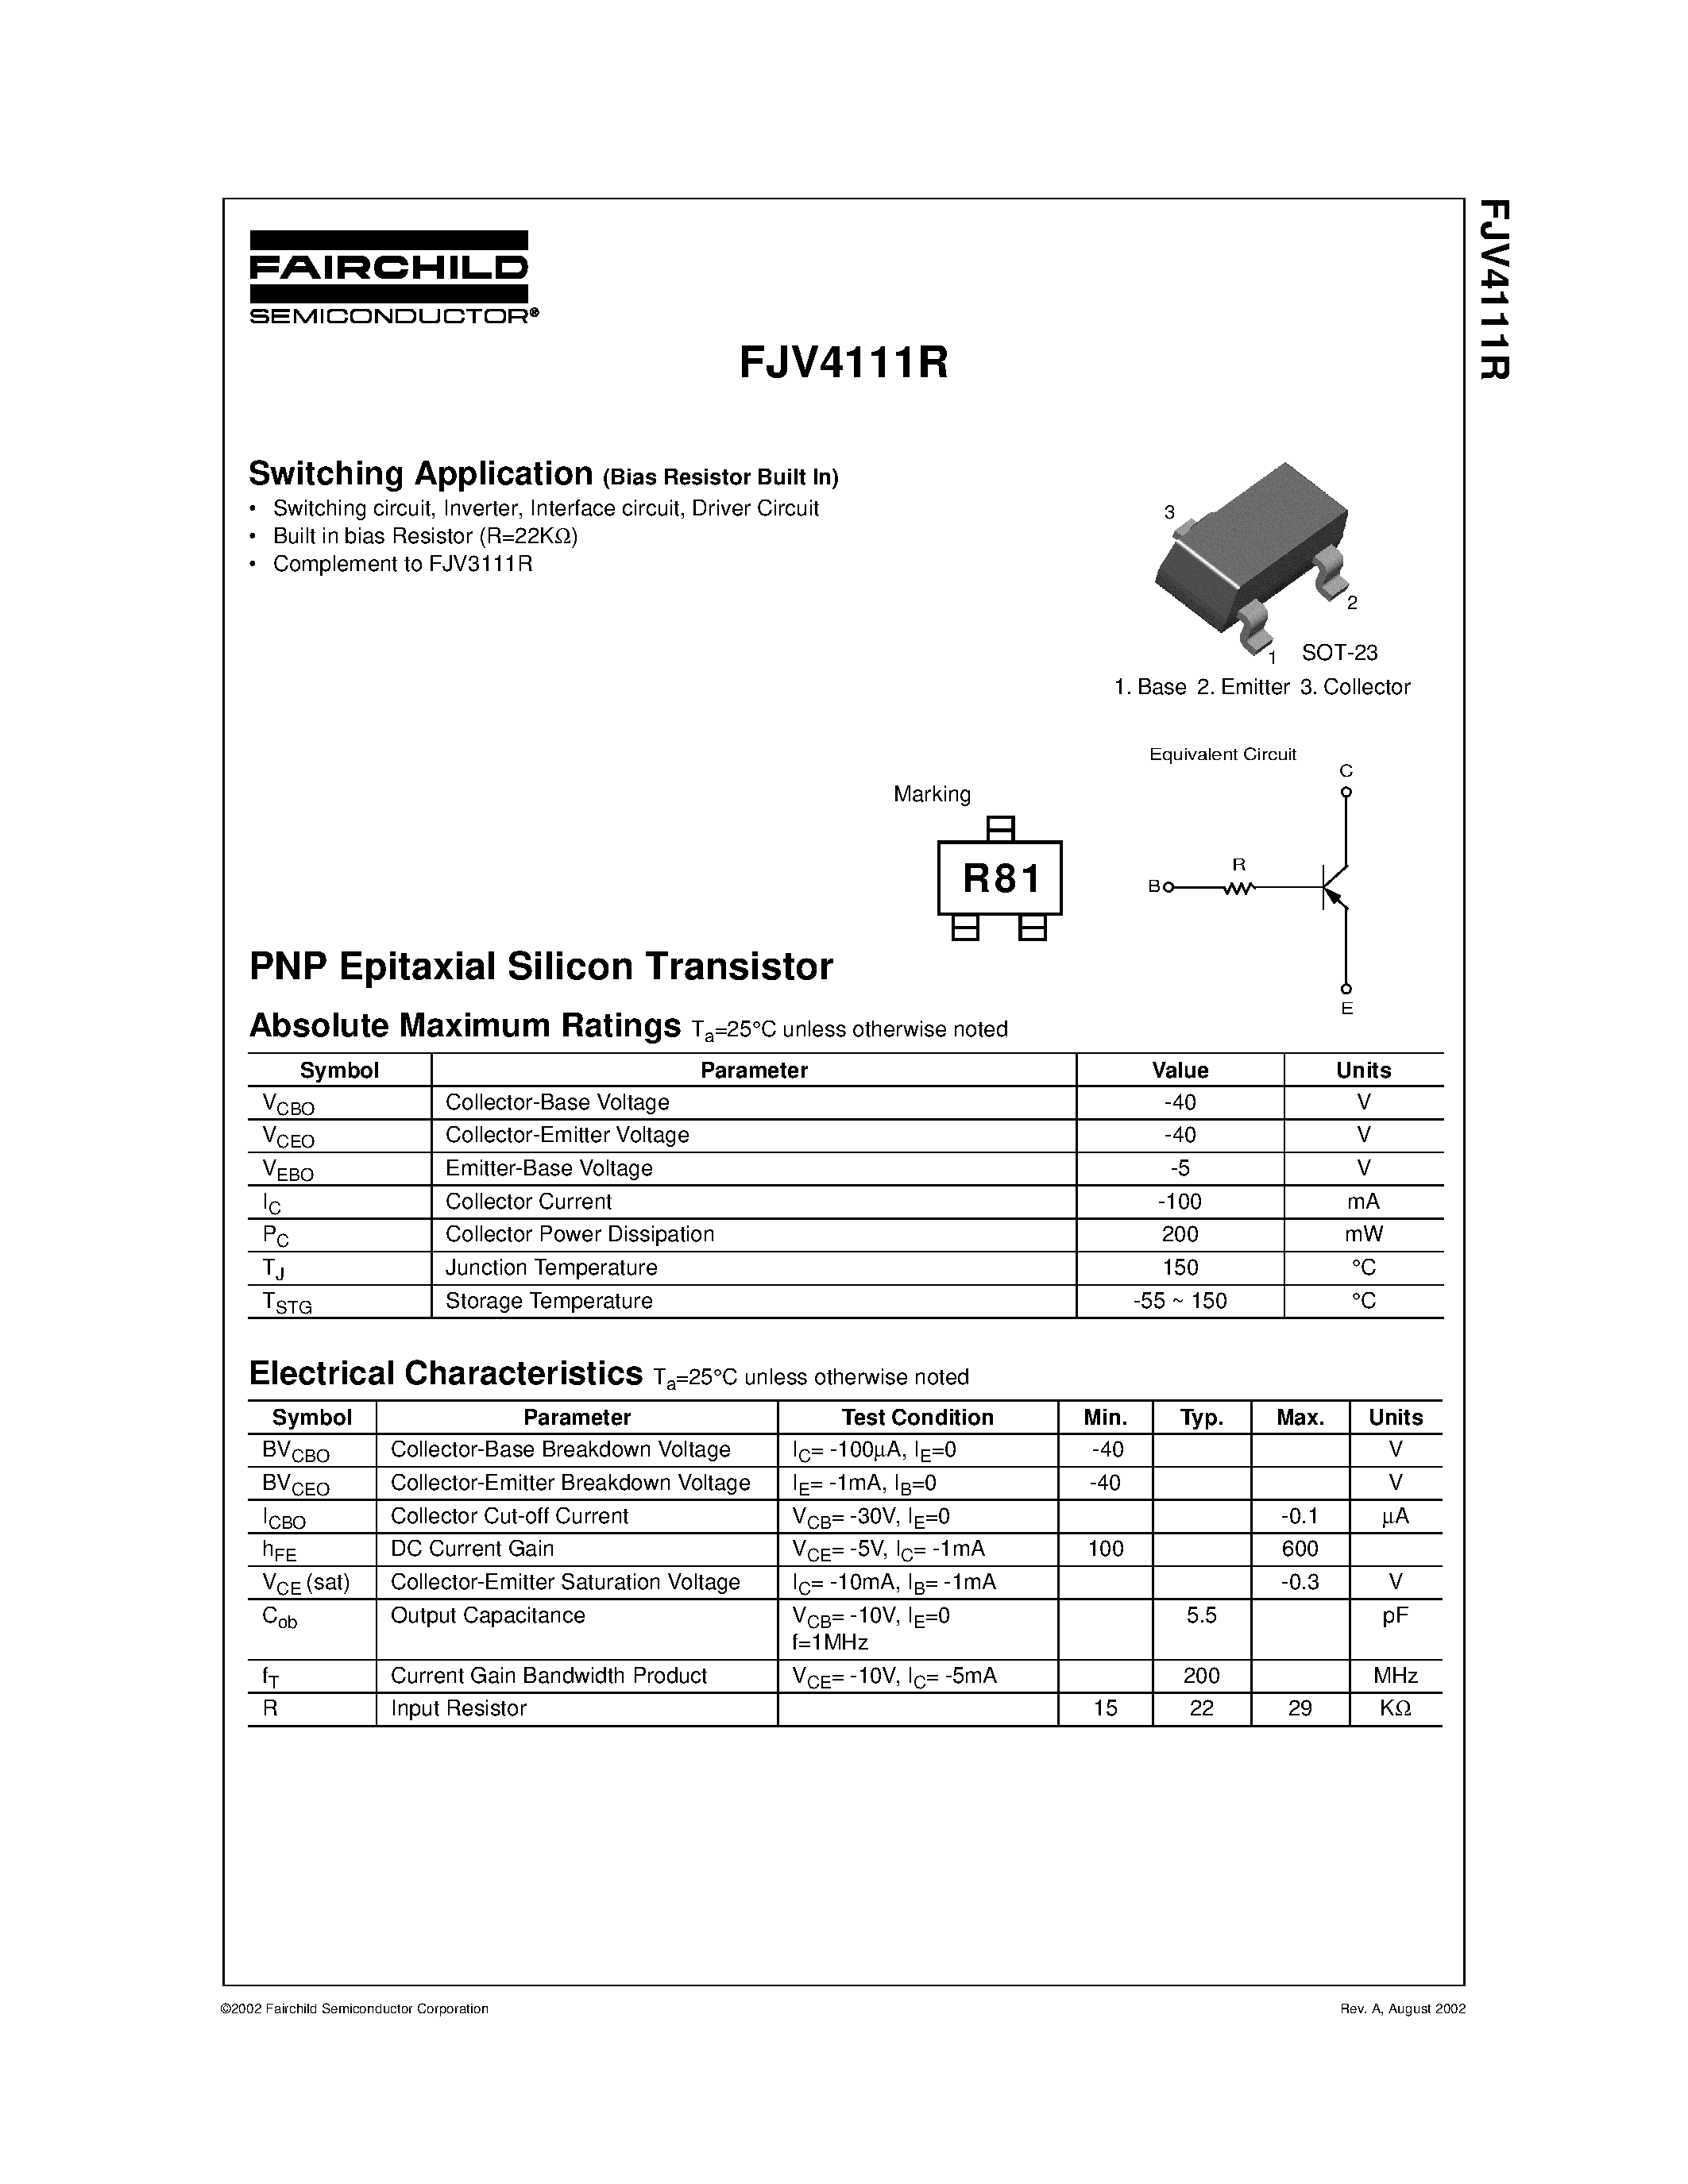 Datasheet FJV4111R - PNP Epitaxial Silicon Transistor page 1